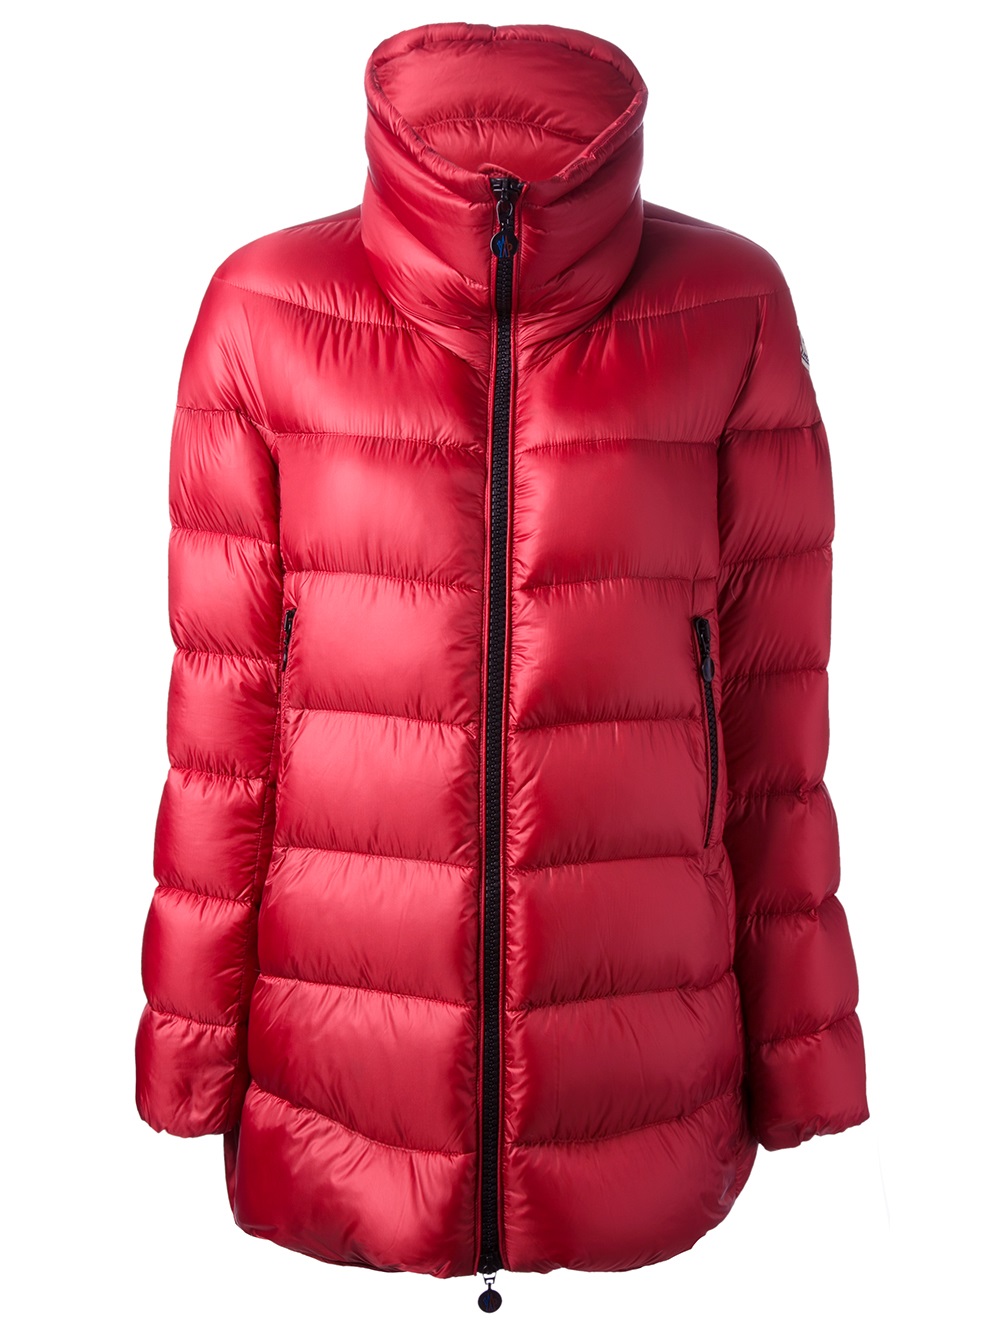 Lyst - Moncler Elevee Jacket in Red